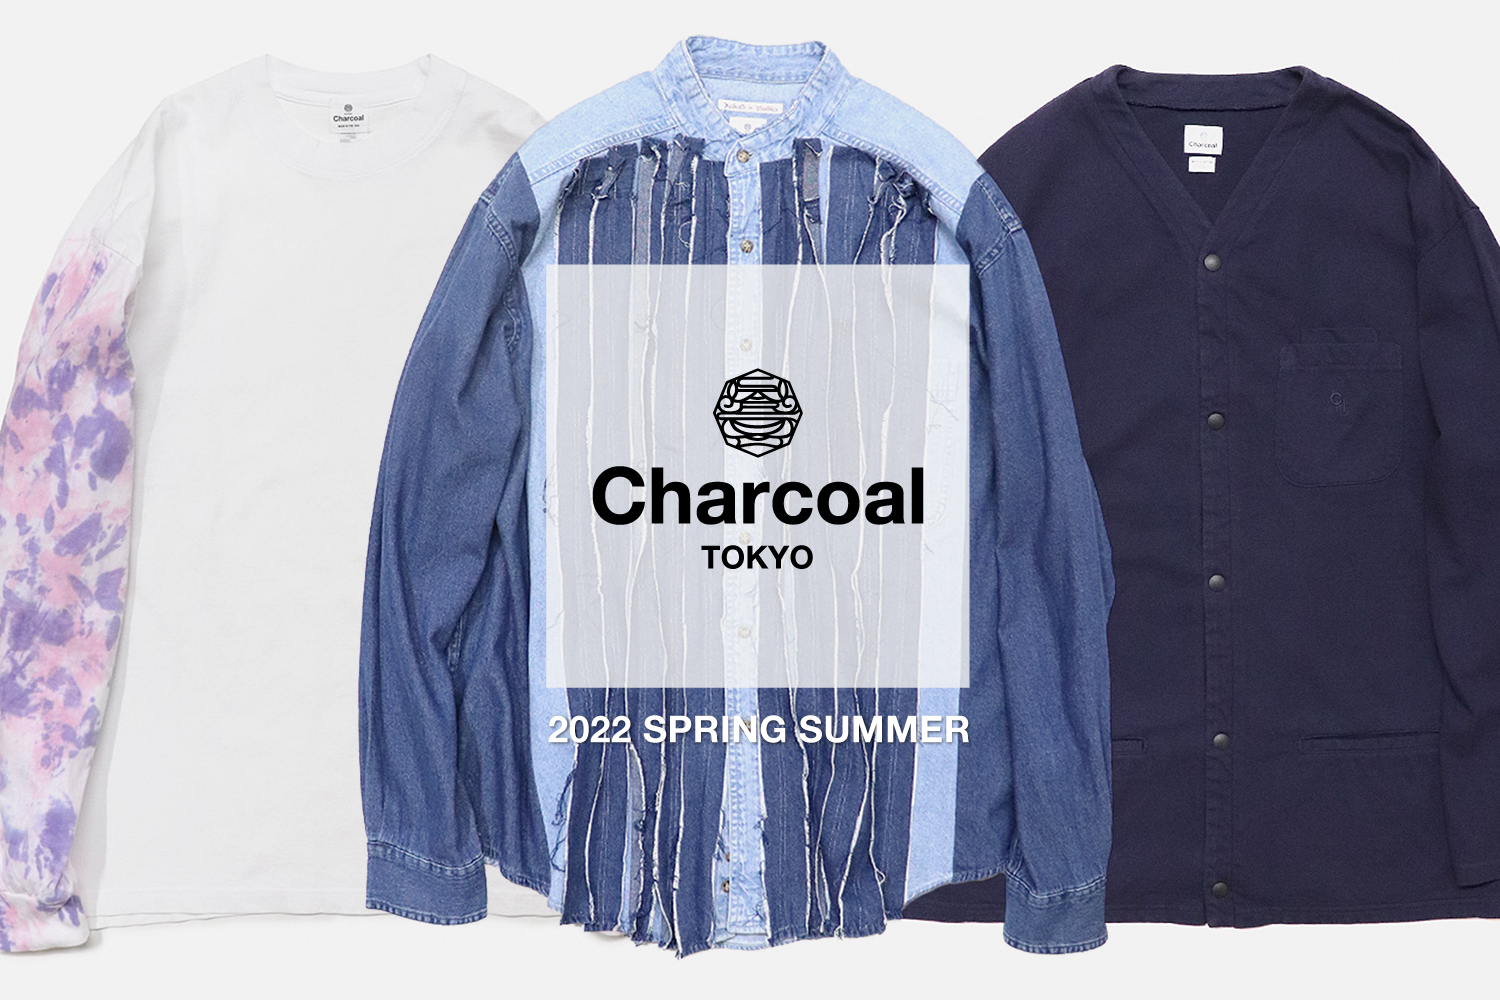 Charcoal TOKYO〉2022 先行予約会開催のお知らせ | Charcoal TOKYO